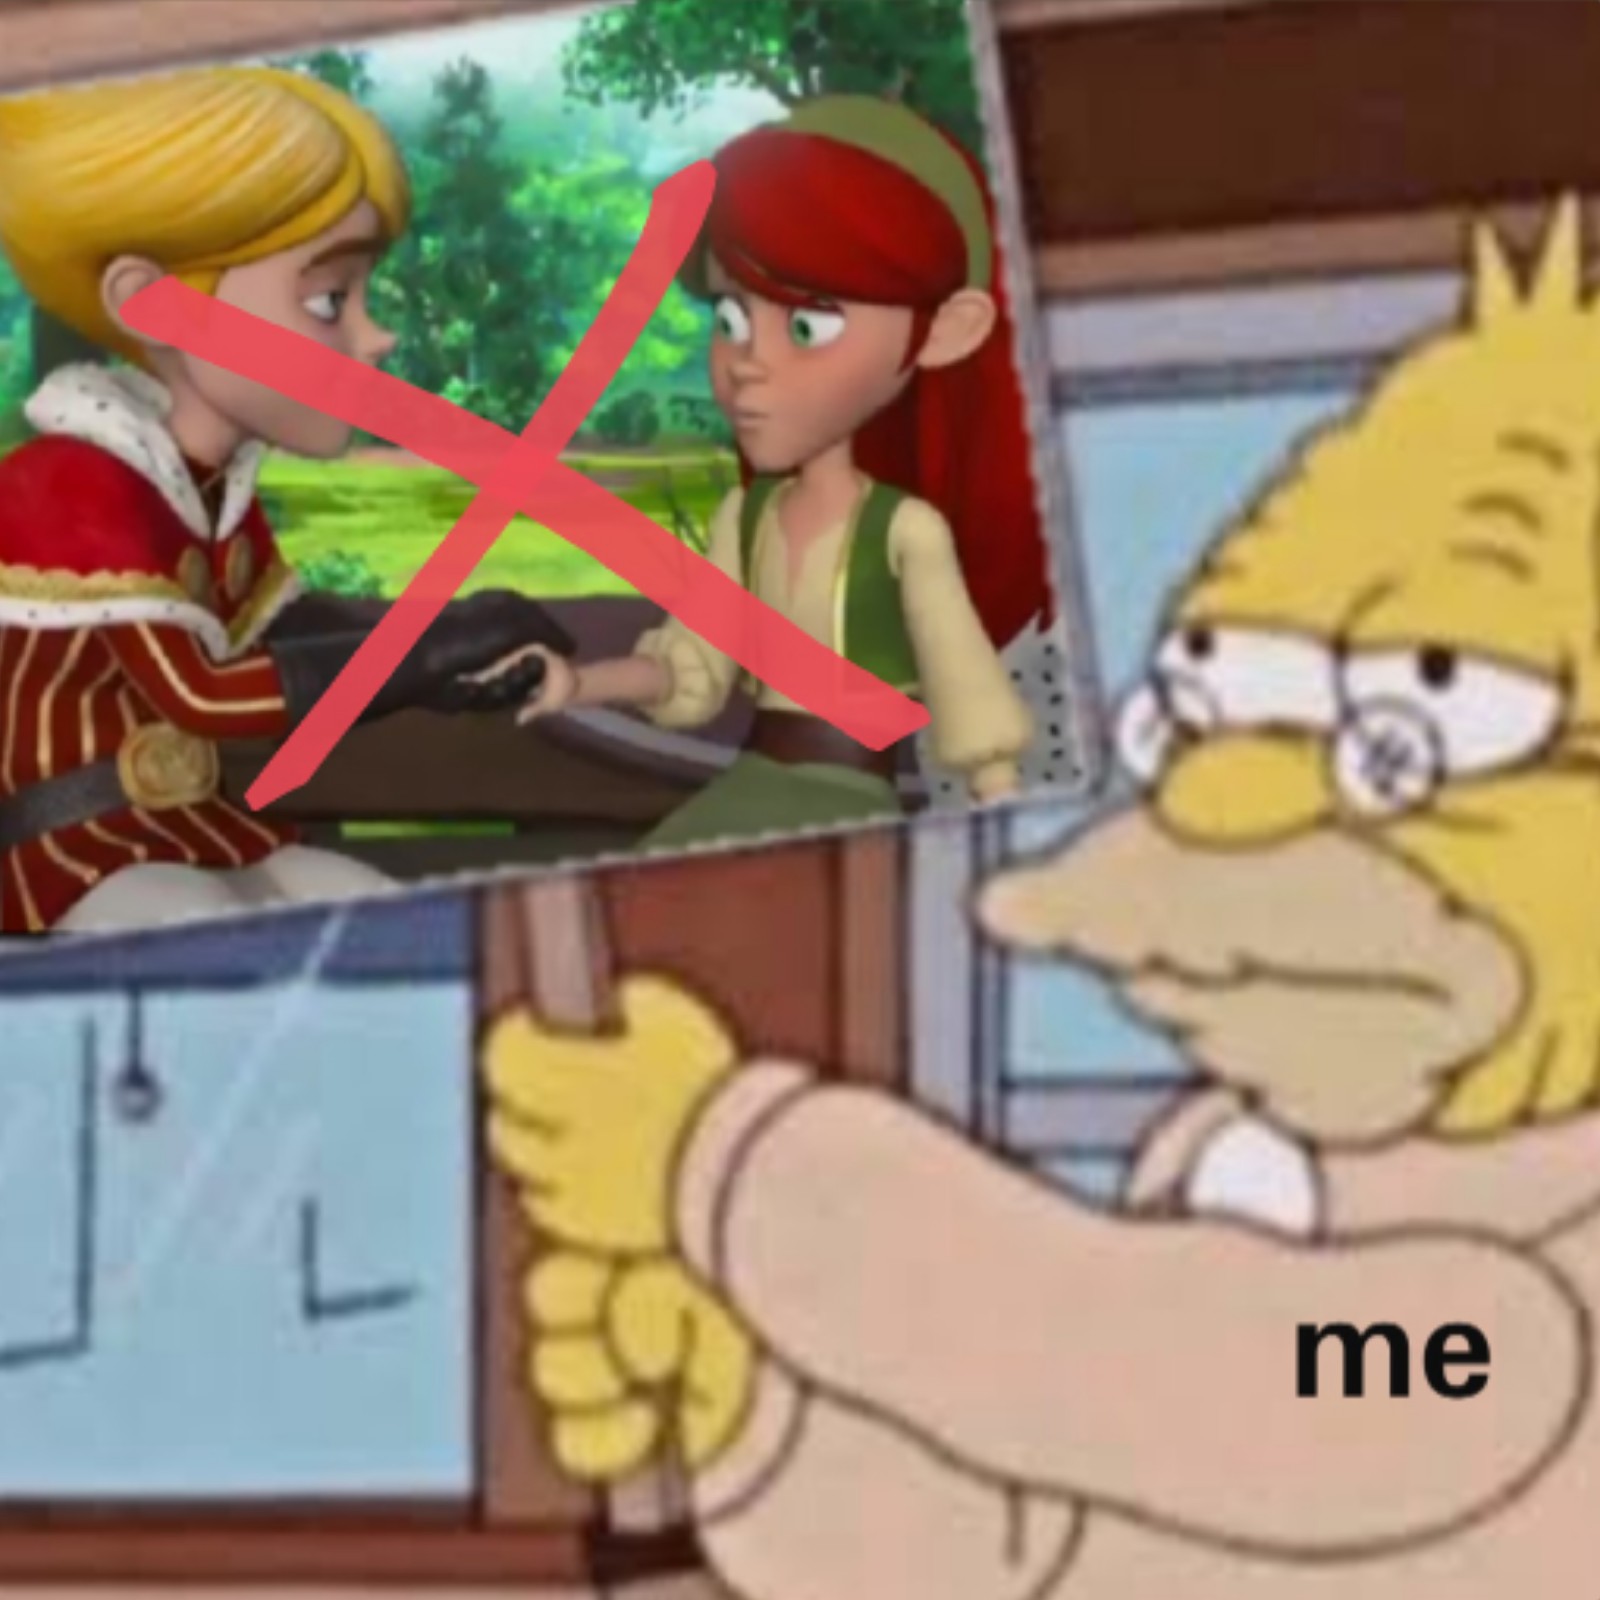 High Quality Never Been Exist Jolenor Toxic Ship! Blank Meme Template